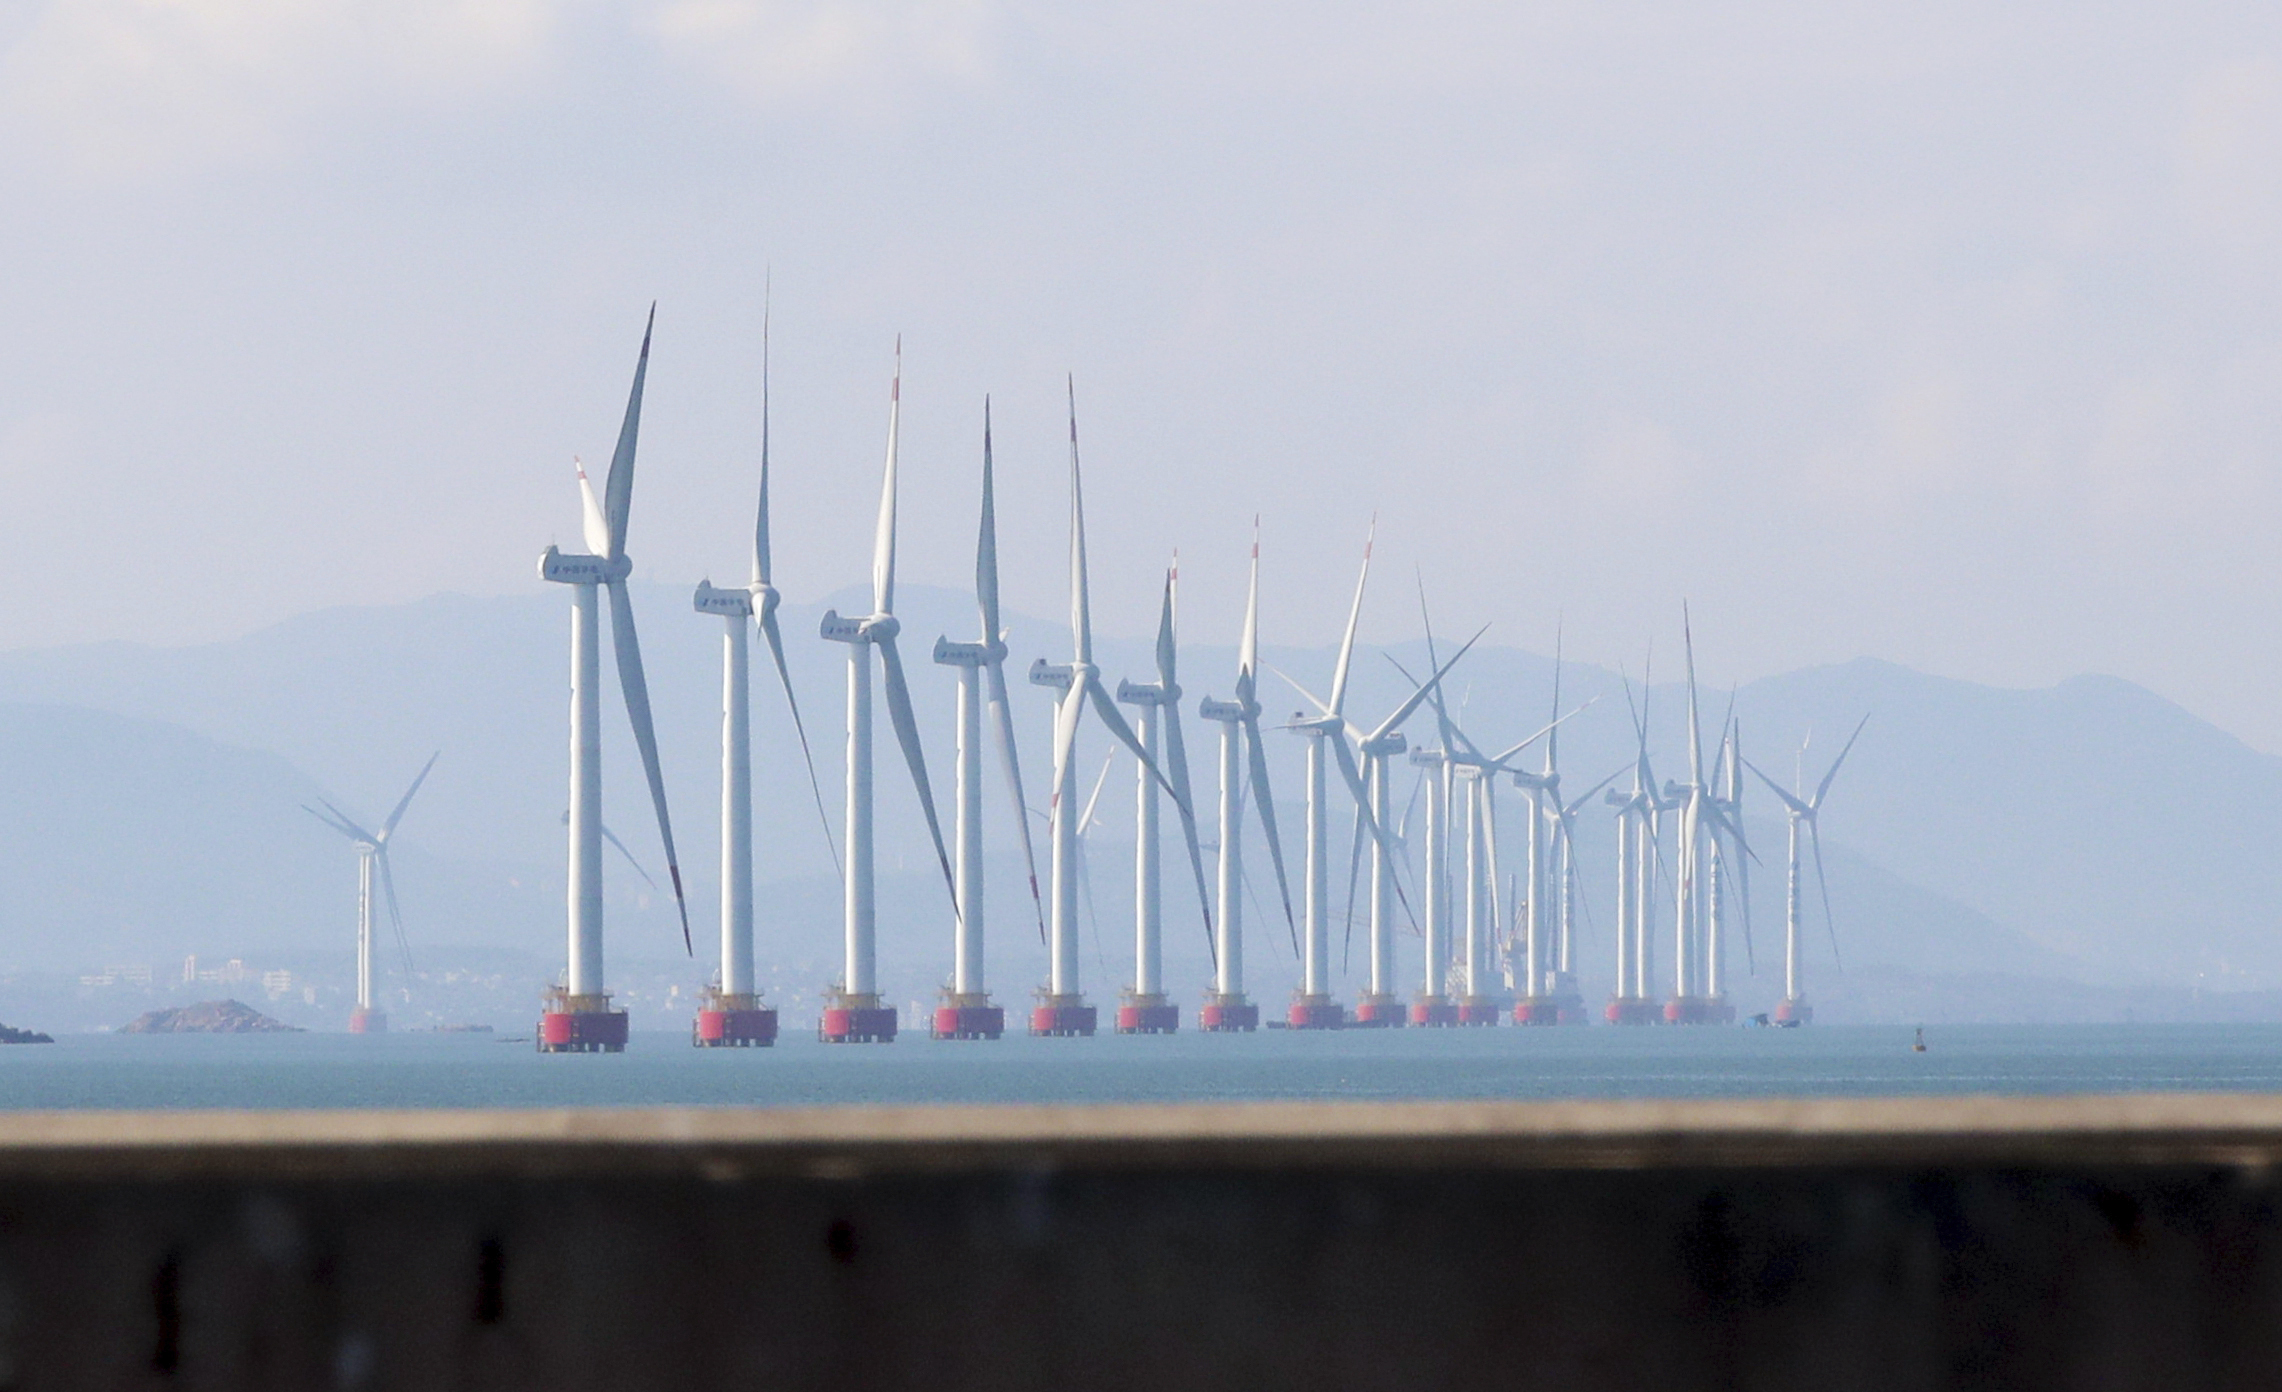 A row of massive power generating windmills can be seen floating on the water offshore.